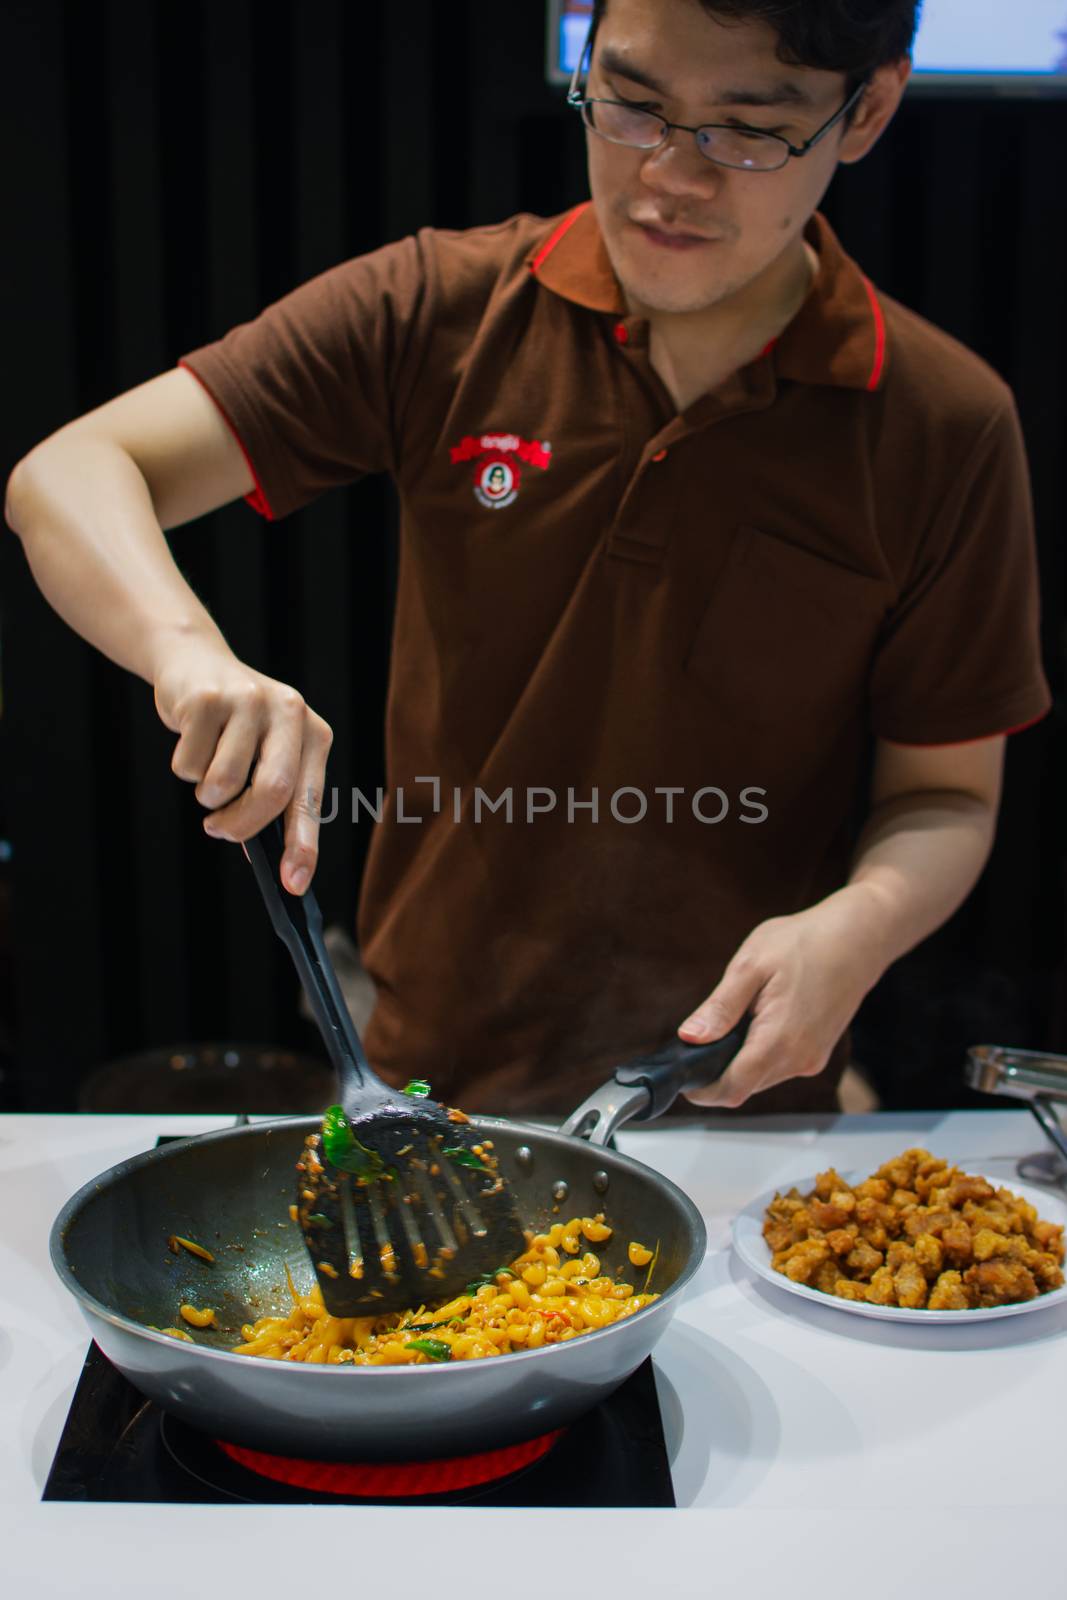 Chef cooking a food for show and sale to customers by PongMoji